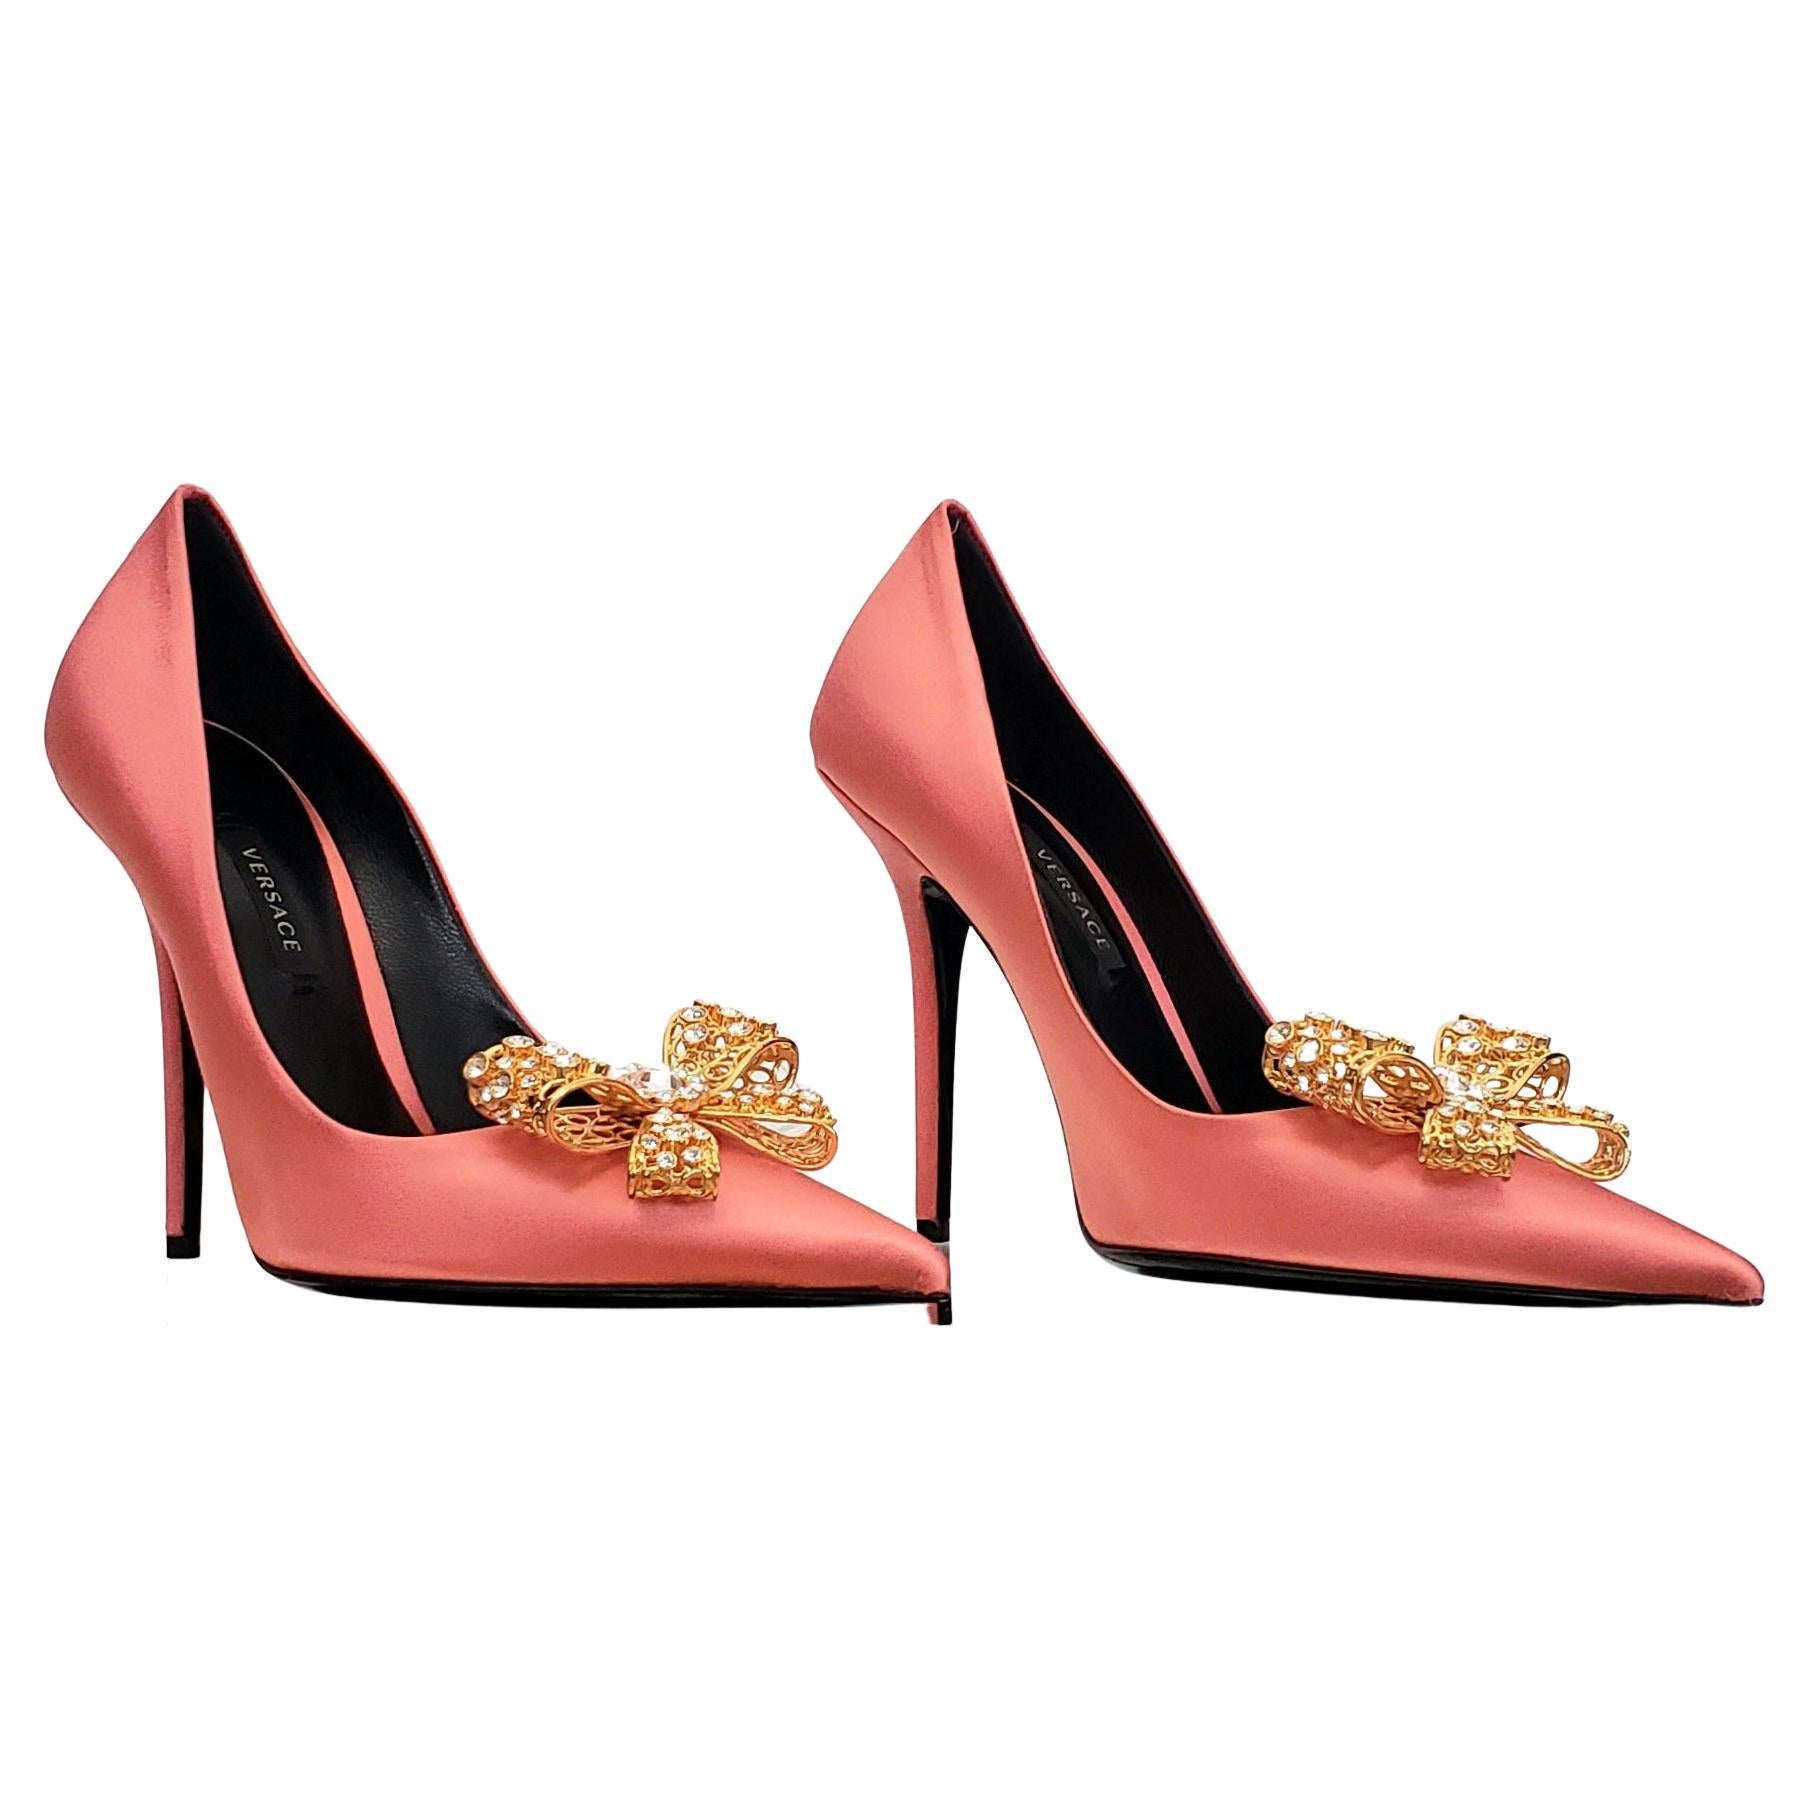 VERSACE 2019 ROSE SATIN PUMP SHOES w/ GOLD PLATED CRYSTAL EMBELLISHED BOW 38 - 8 For Sale